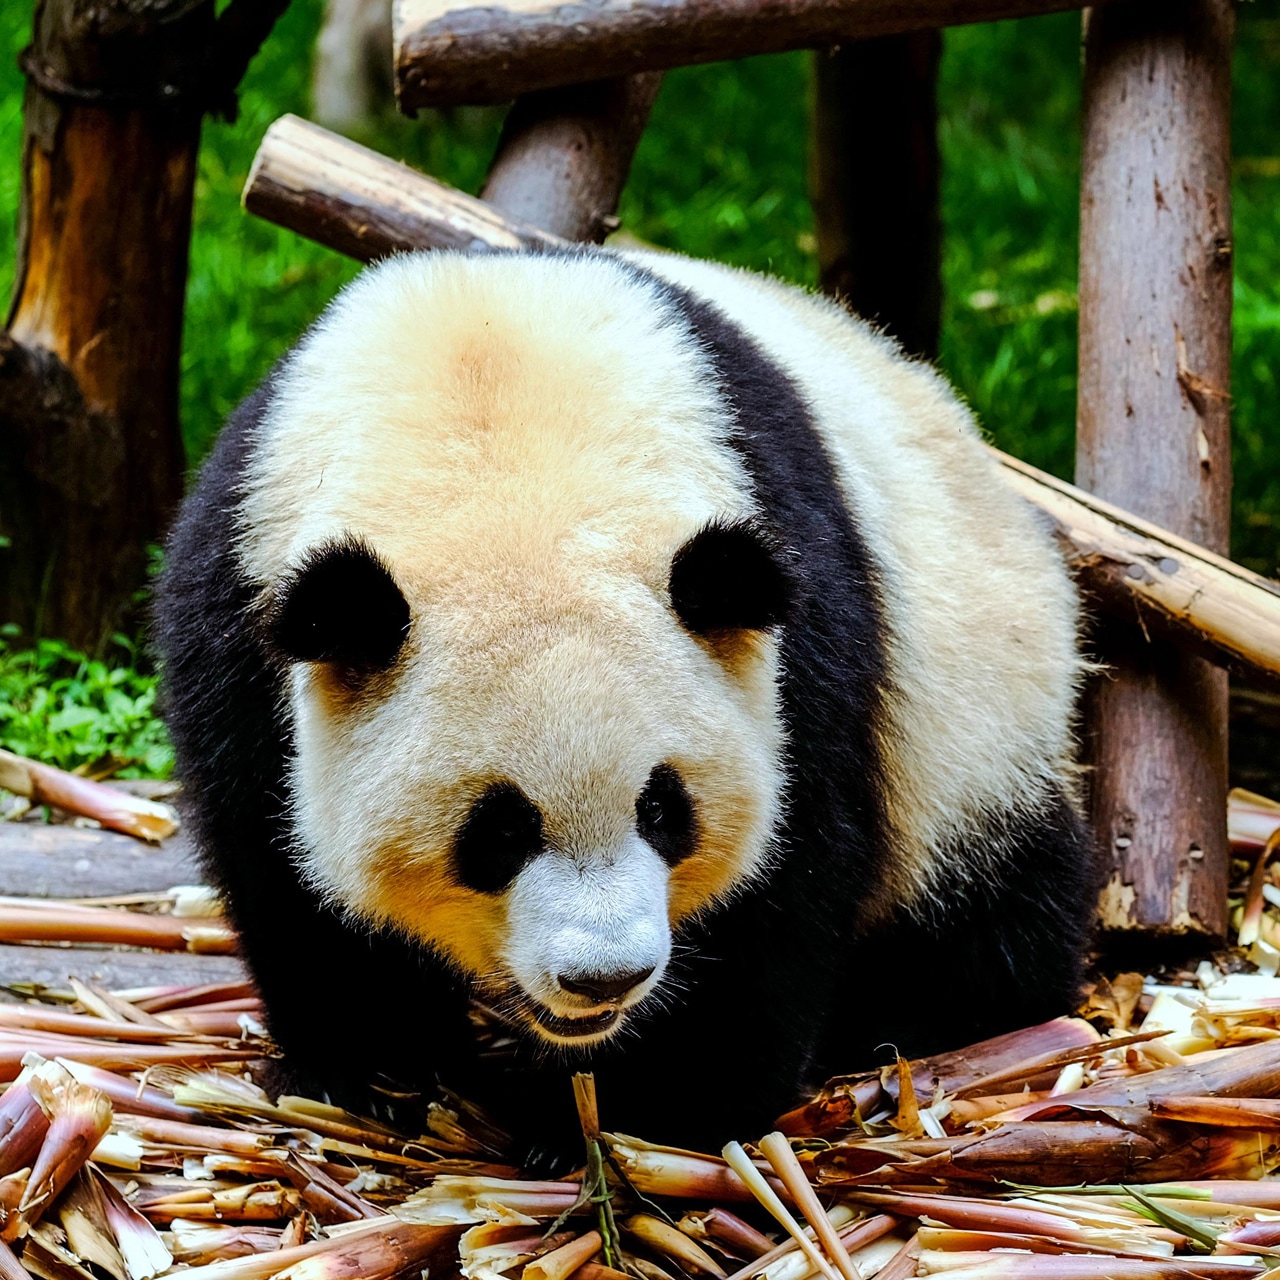 A giant panda in a pile of bamboo